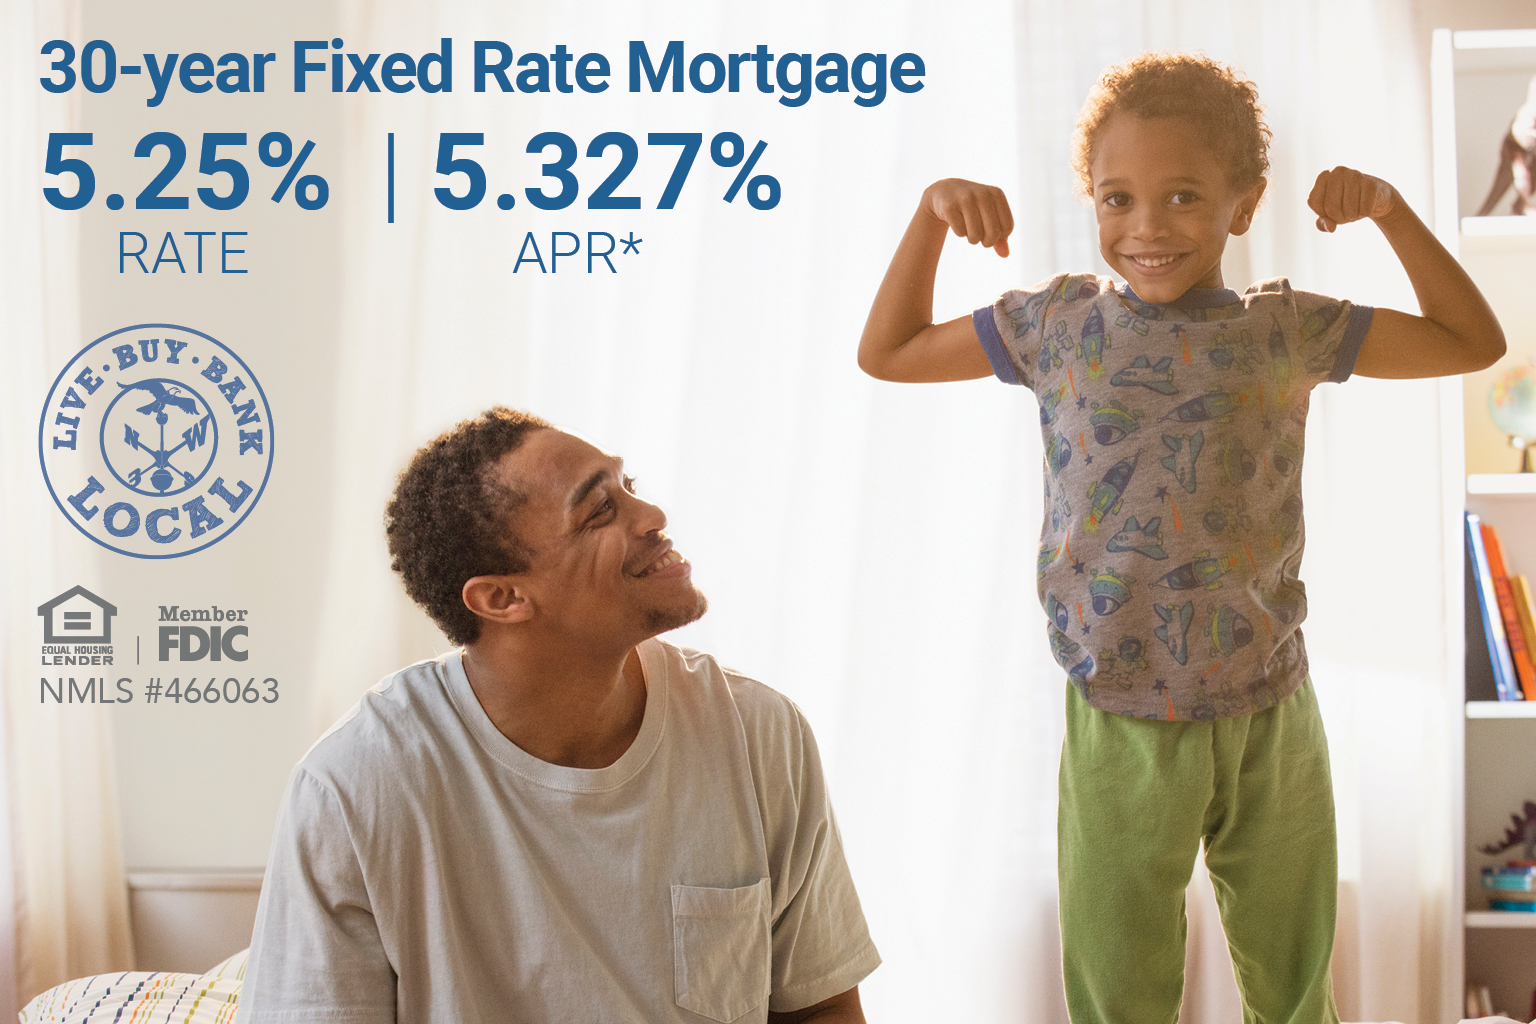 30-Year Fixed Rate Mortgage